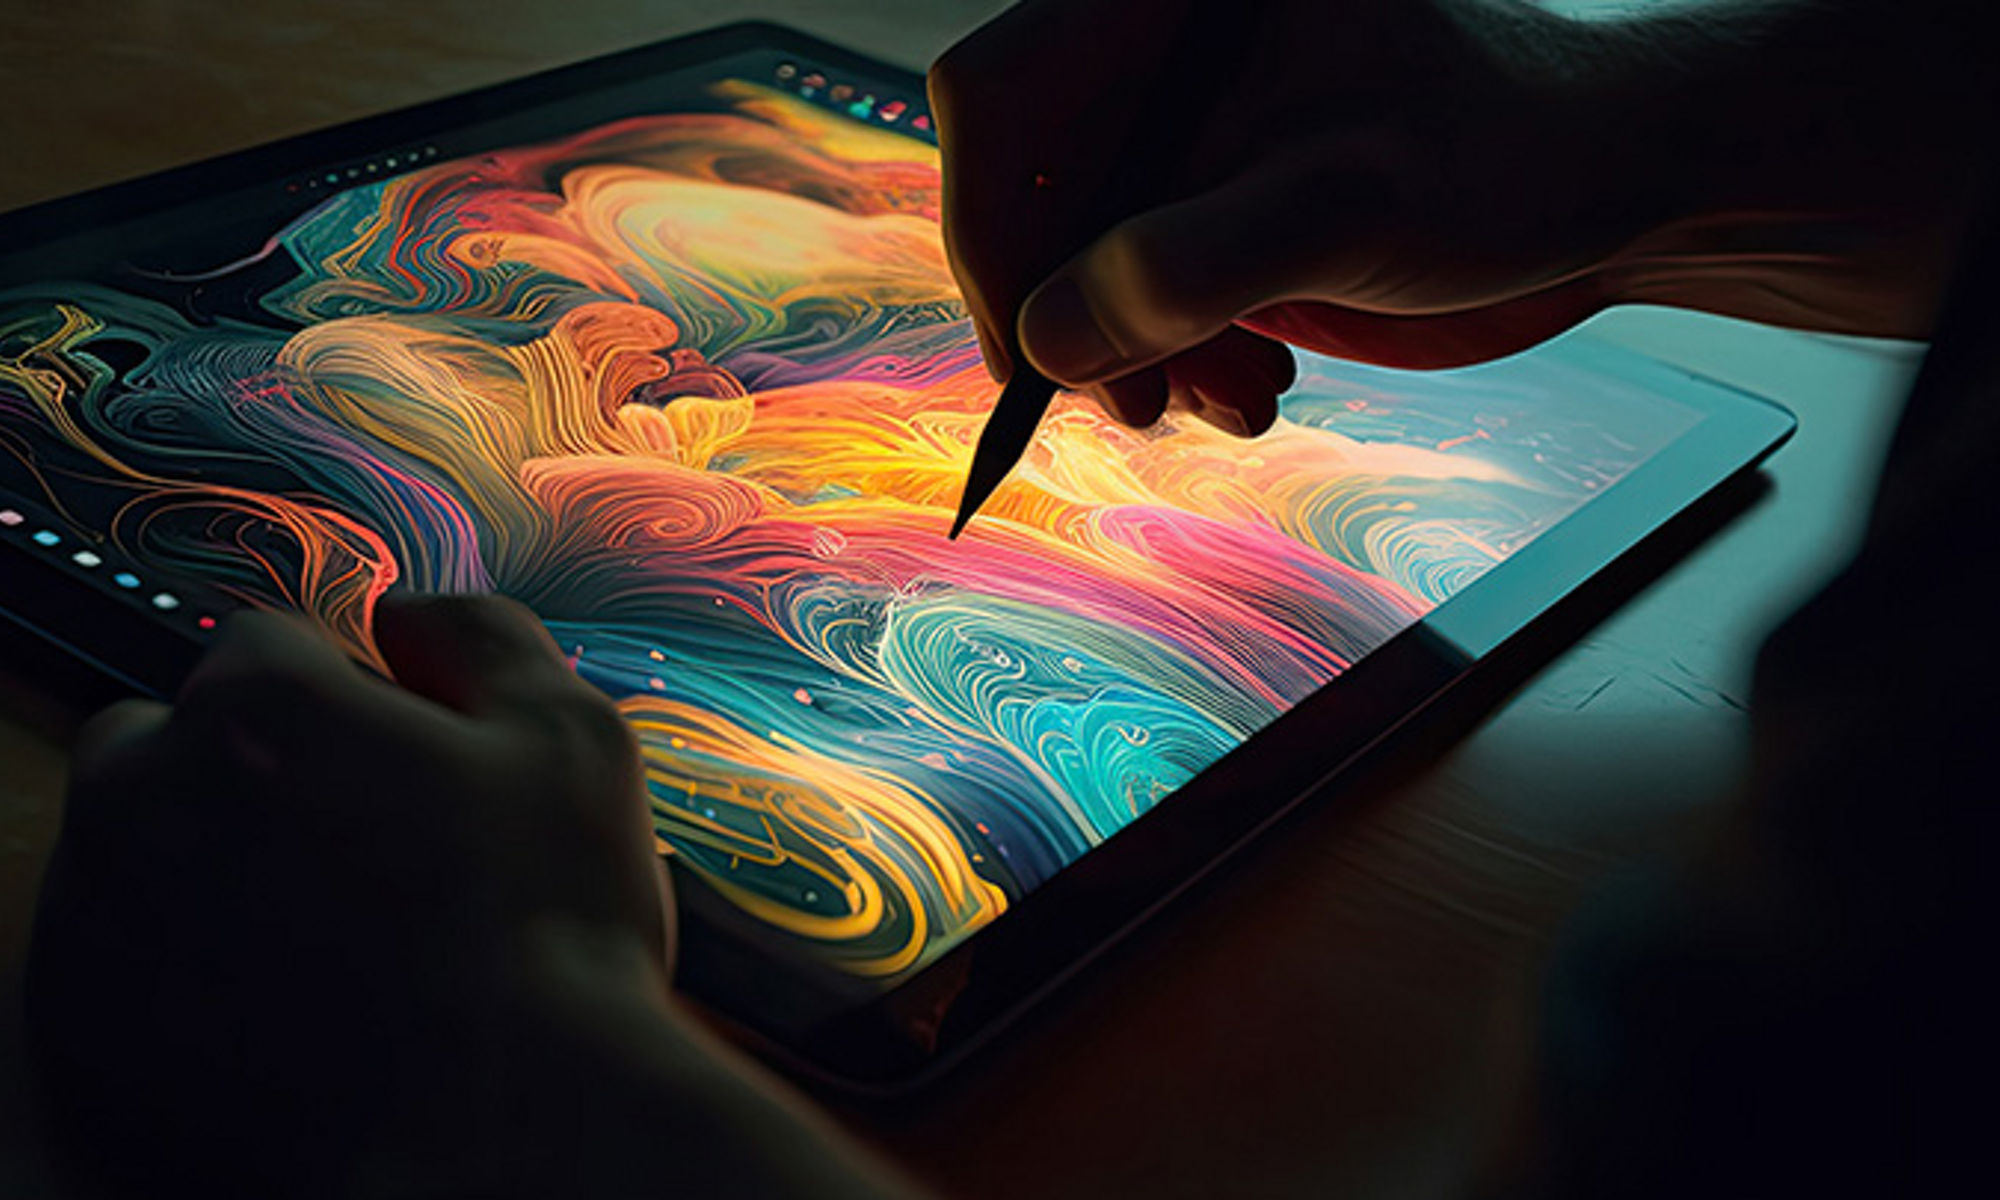 An artist in a dimly lit room using a stylus to create a colorful abstract design on a tablet